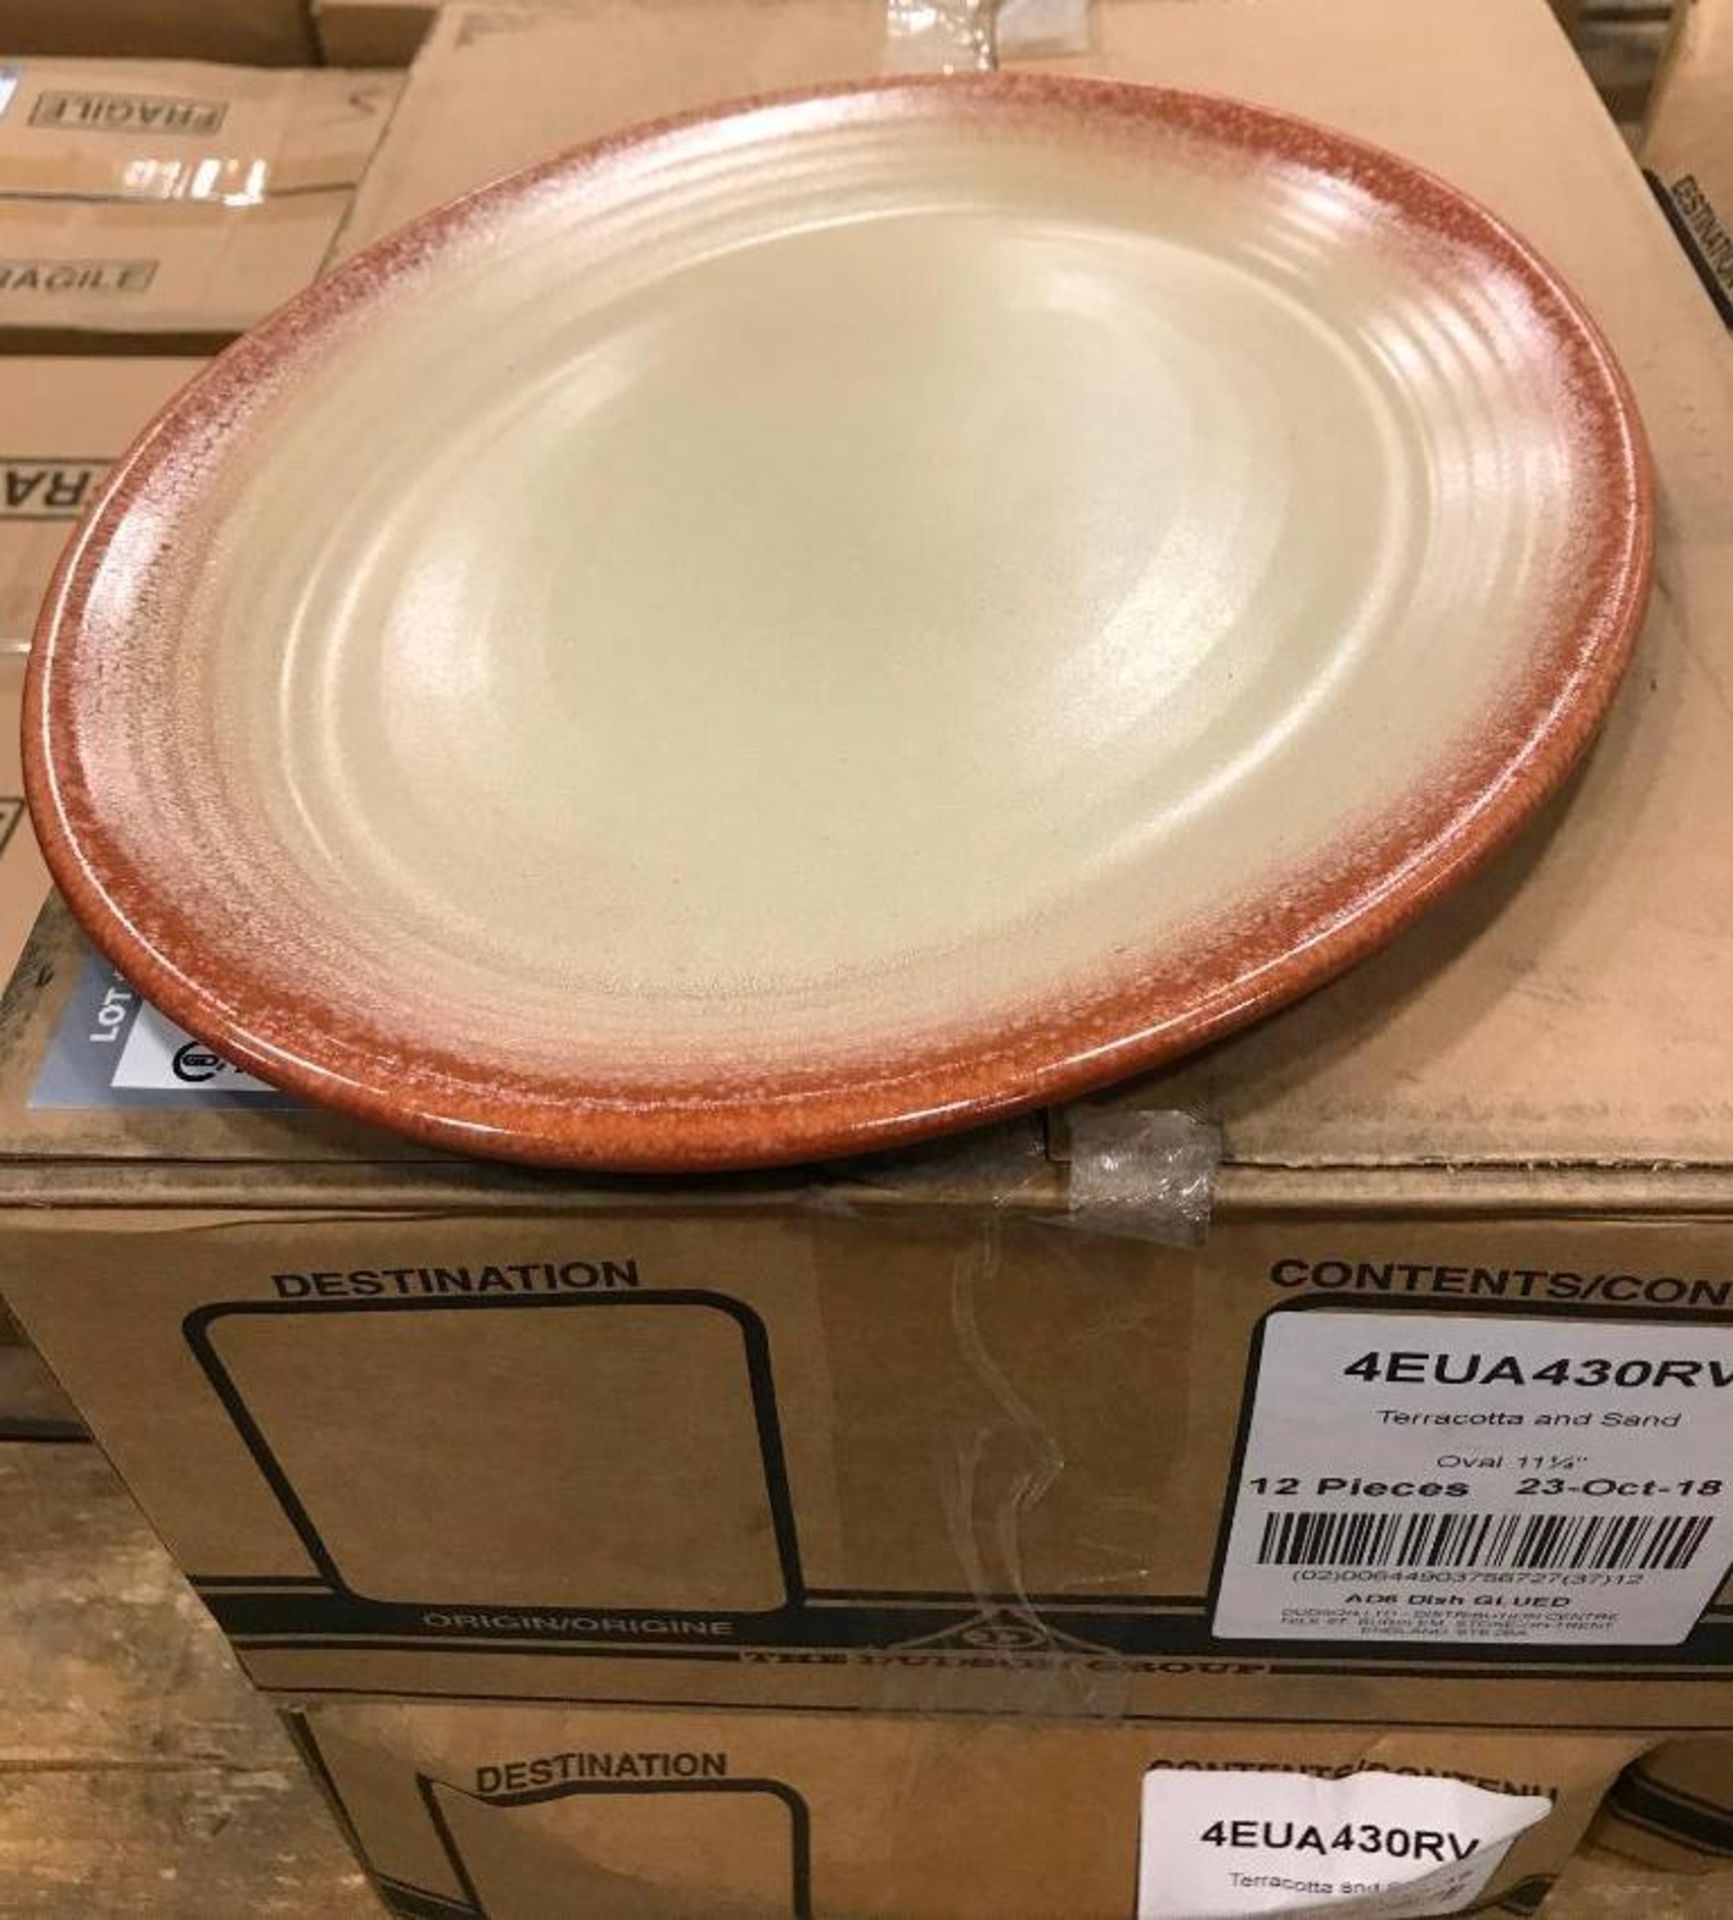 2 CASES OF DUDSON TERRACOTTA & SAND 11 1/4" OVAL PLATE - 12/CASE, MADE IN ENGLAND - Image 3 of 5